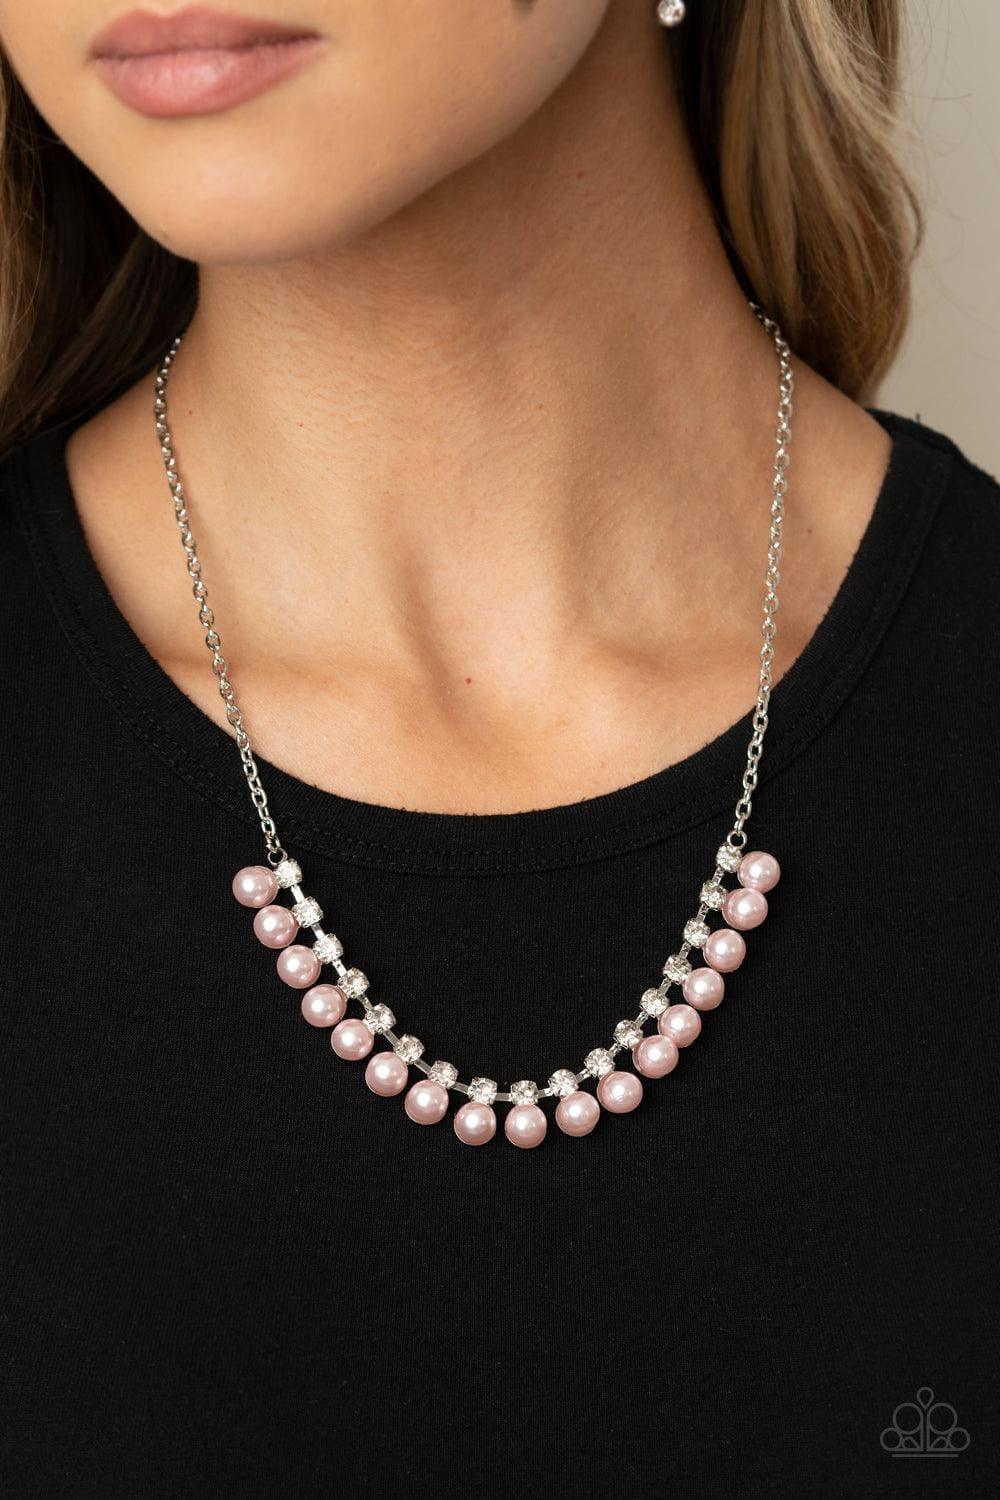 Paparazzi Accessories - Frozen In Timeless - Pink Necklace - Bling by JessieK